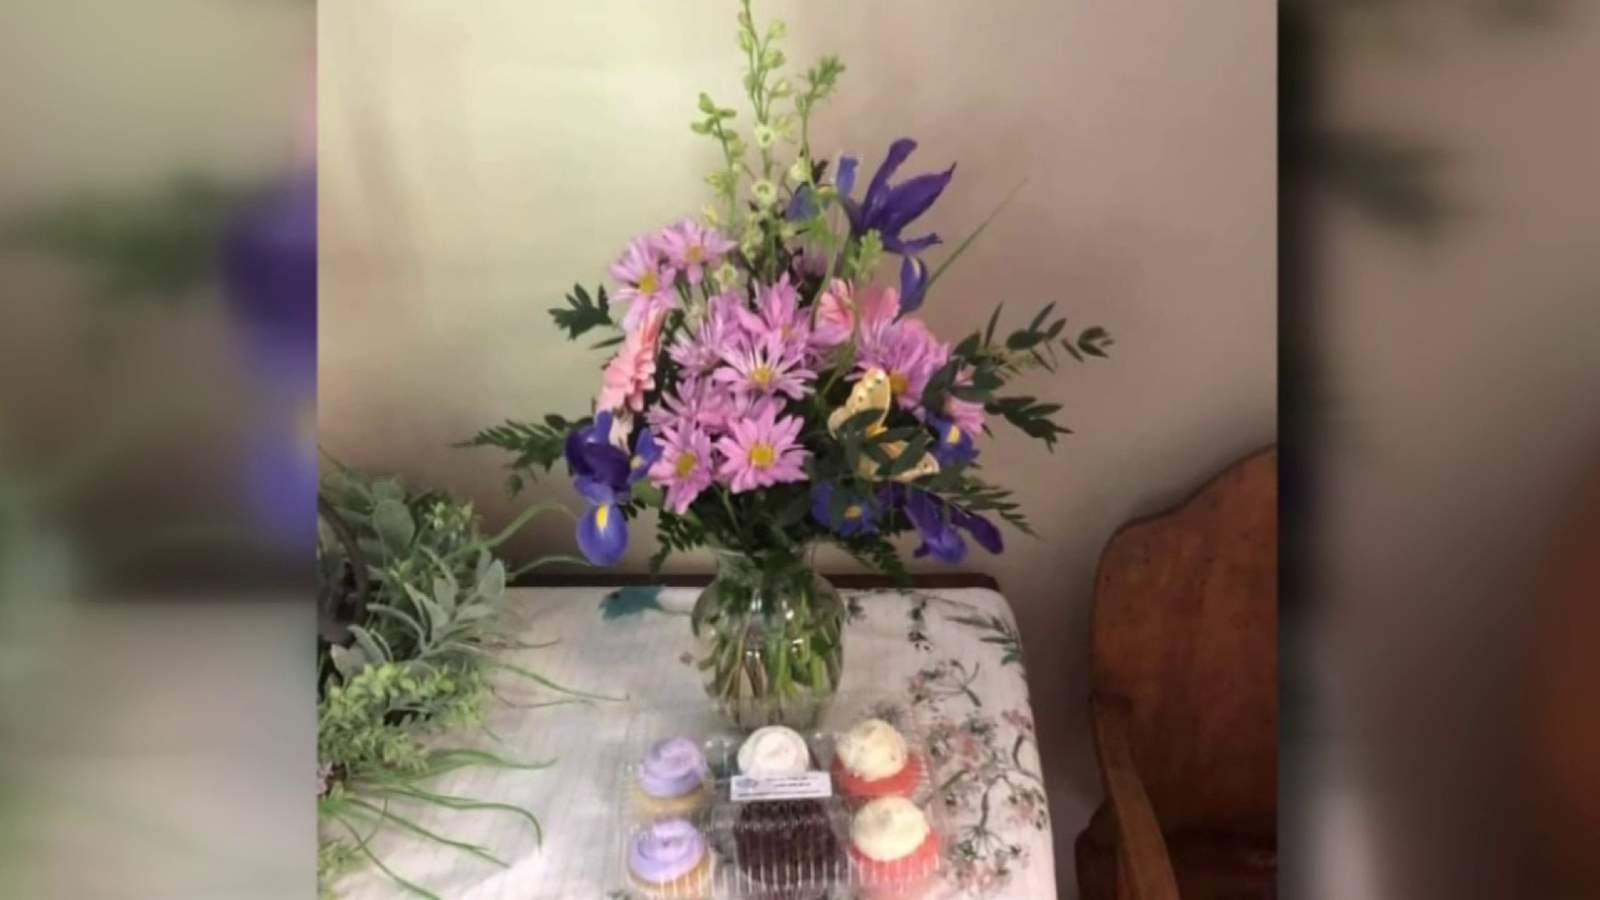 Highlands florist urges support for local shops as some take business to West Virginia